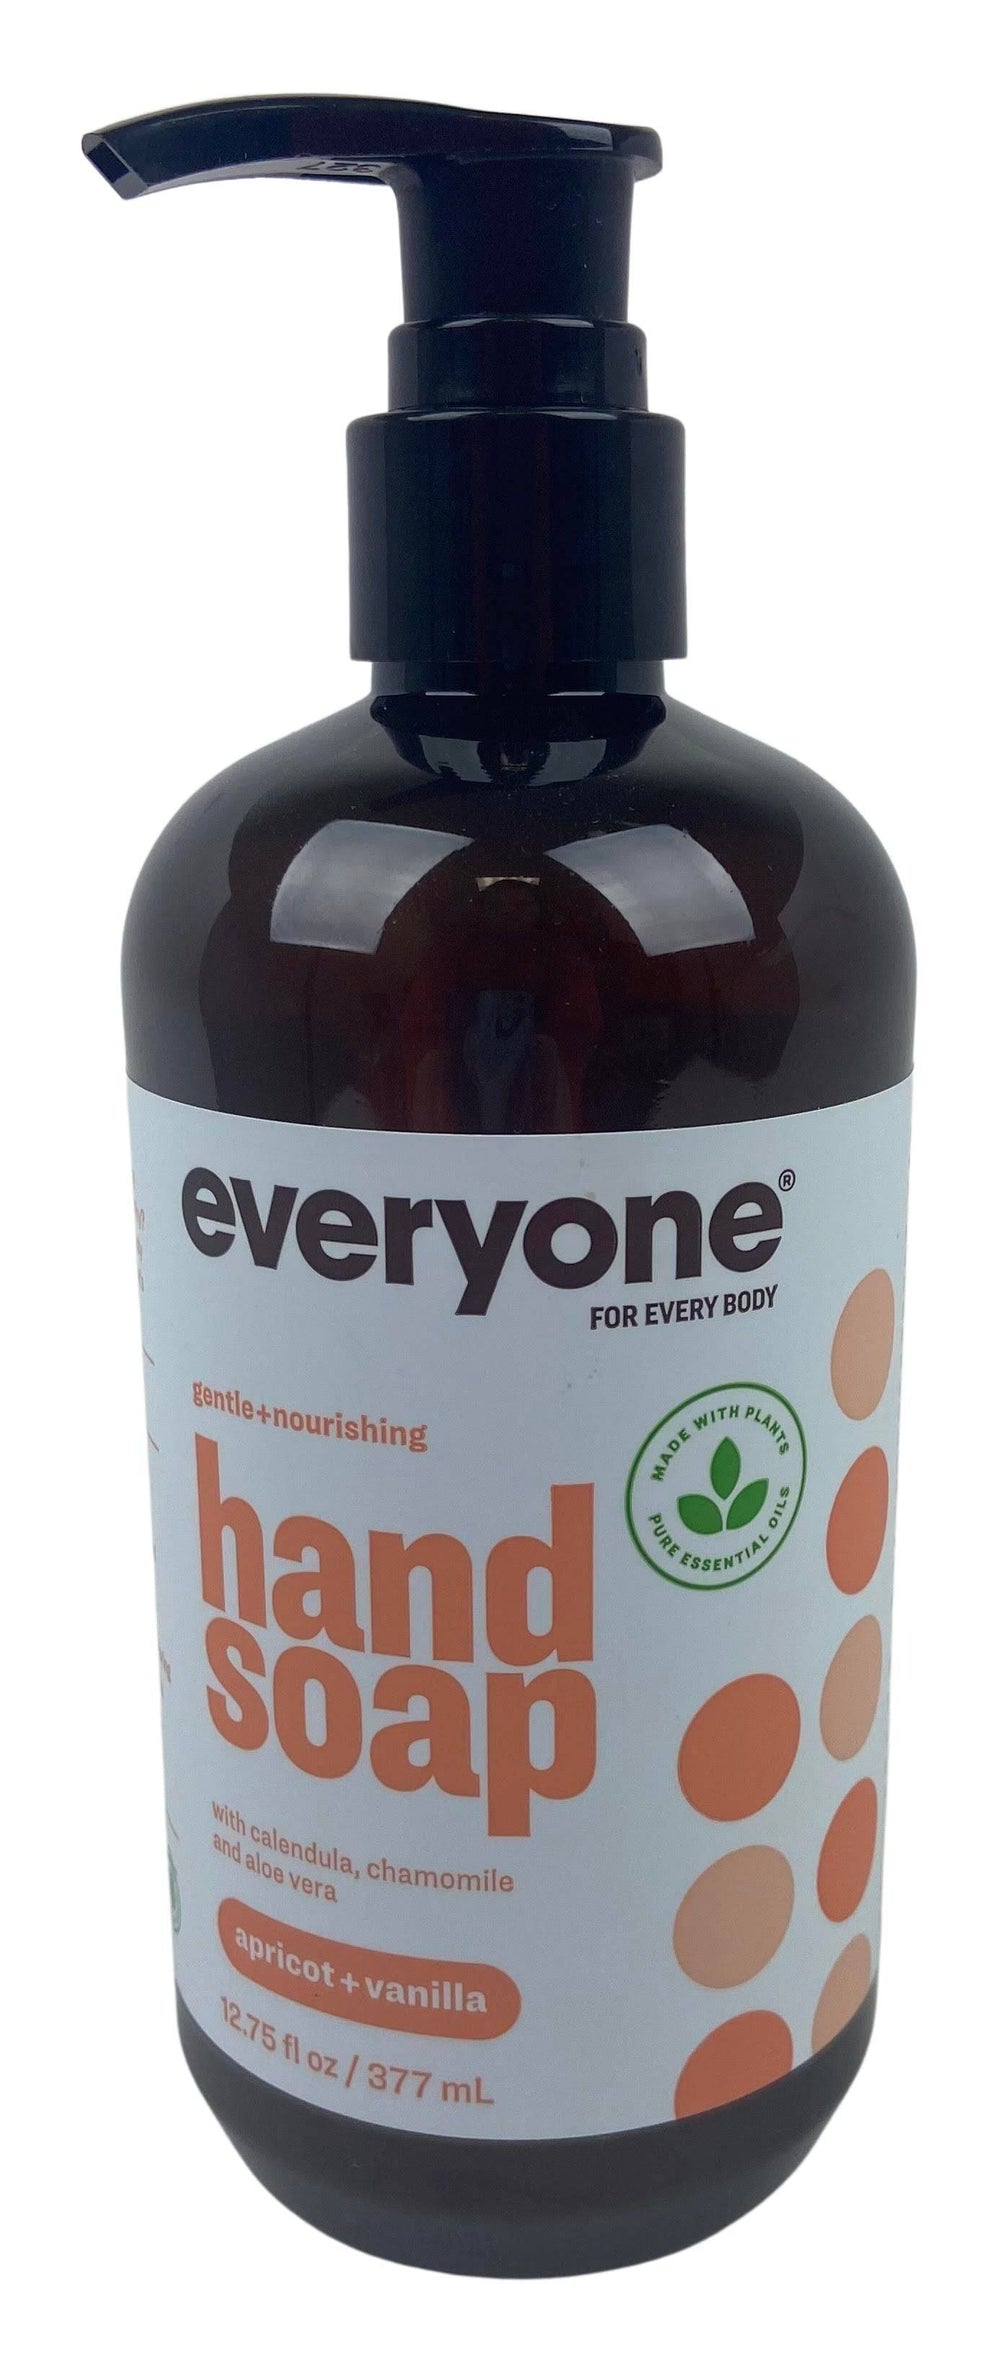 Everyone Hand Soap - Country Life Natural Foods